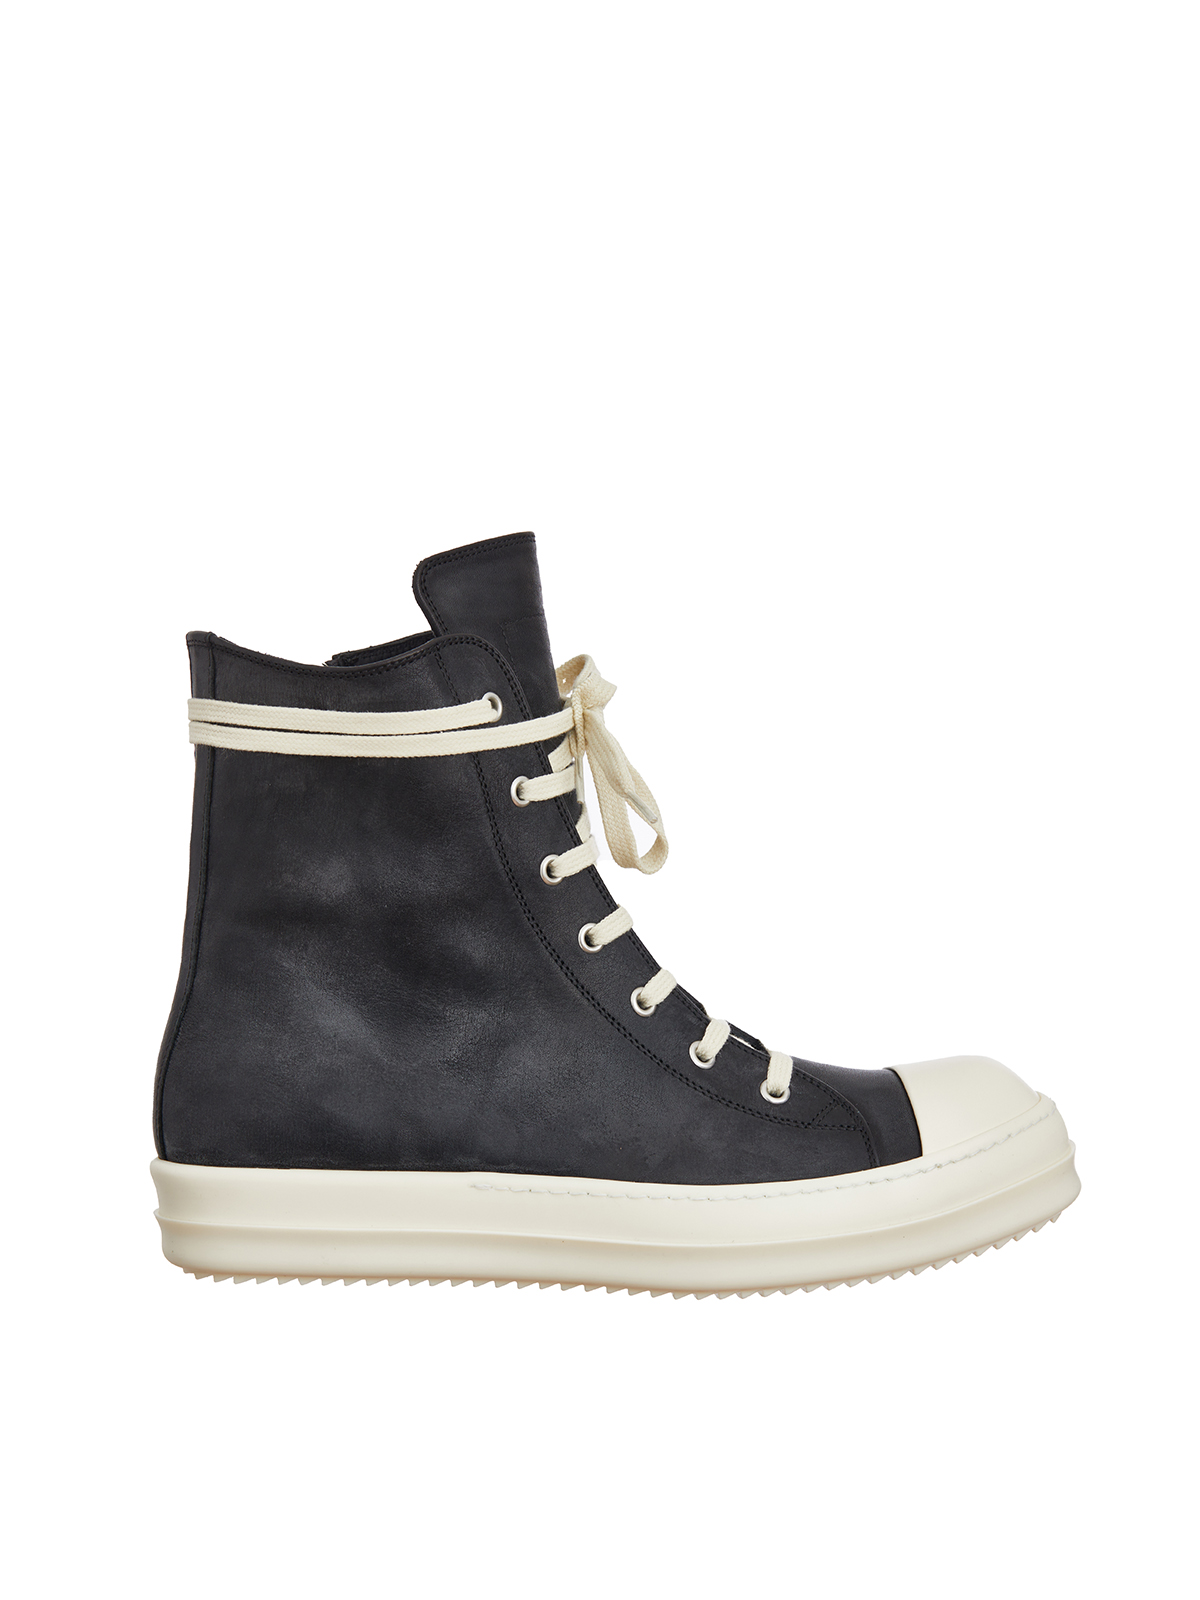 LEATHER HIGH SNEAKER